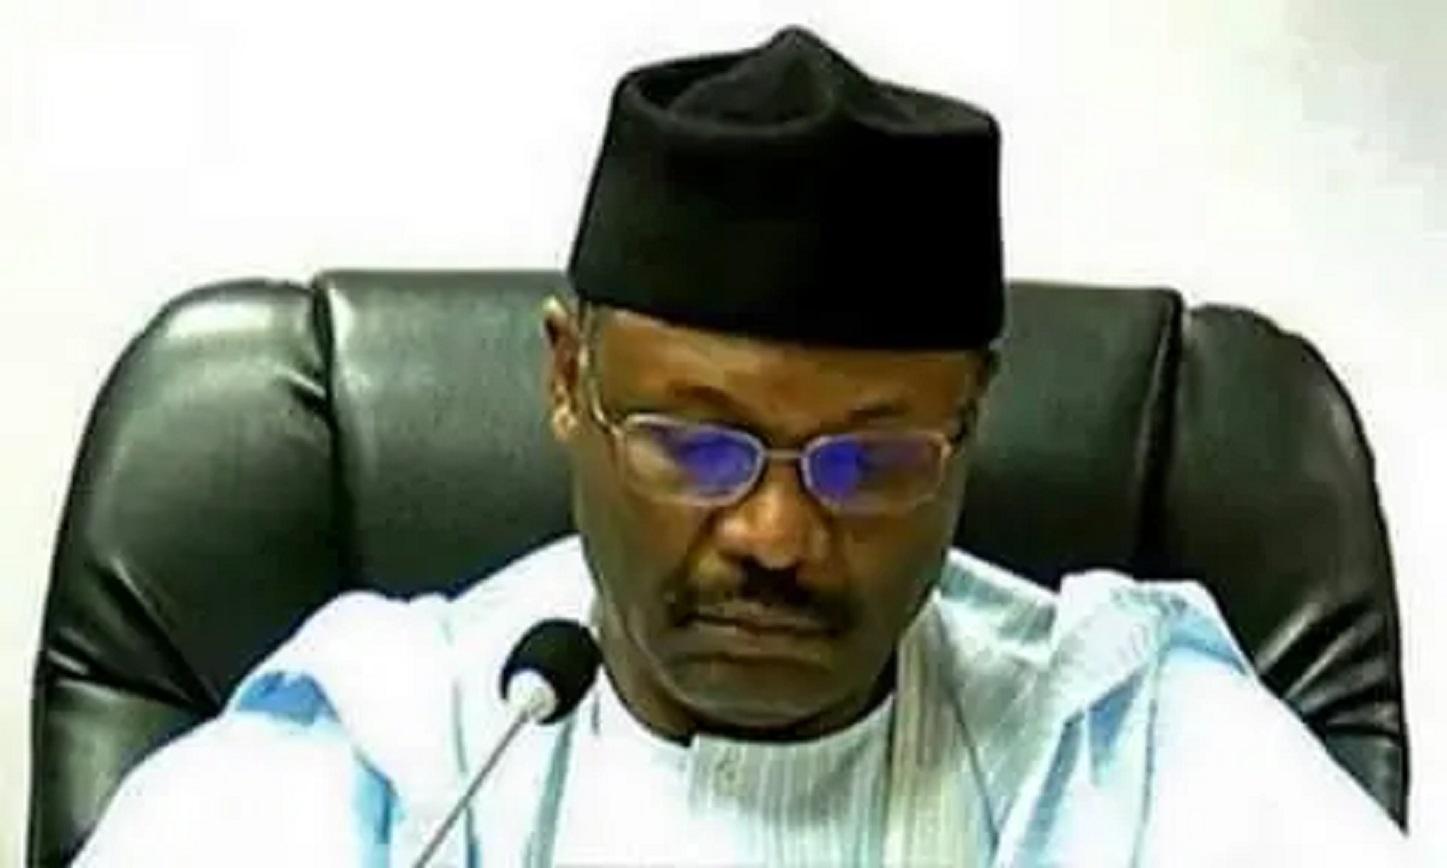 INEC still in talks with CBN over storage of election materials —Festus Okoye